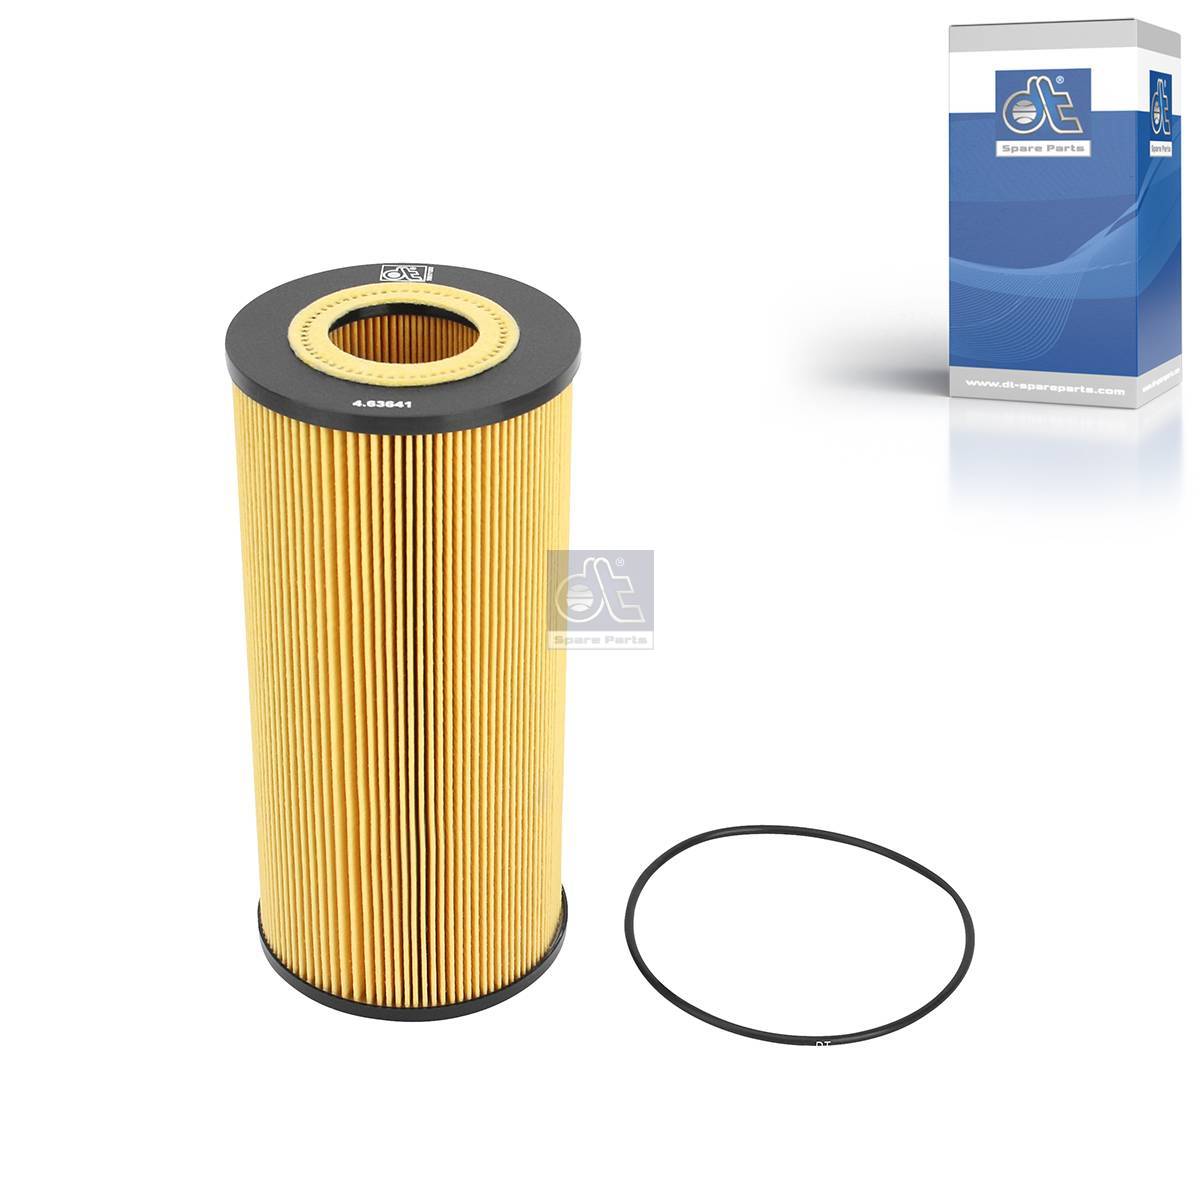 Oil filter insert DT Spare Parts 4.63641